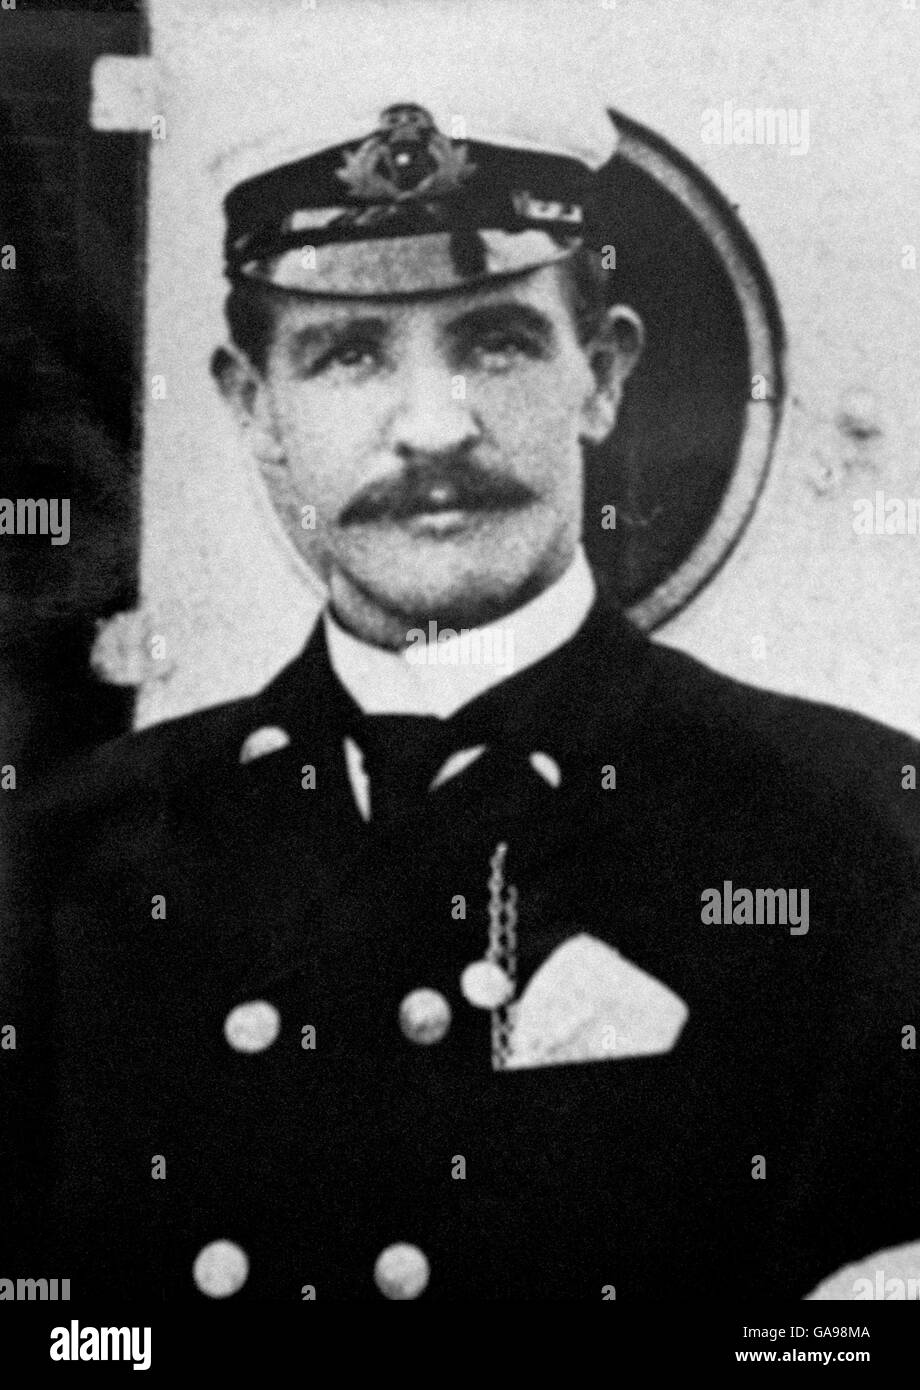 Titanic First Officer William McMaster Murdoch, who is treated as a local hero in his native town of Dalbeattie. The executive vice-president of the 20th Century Fox studio, Scott Neeson, travelled to the Scottish town to apologise for their portrayal of the doomed liner's First Officer as a cowardly murderer. Stock Photo